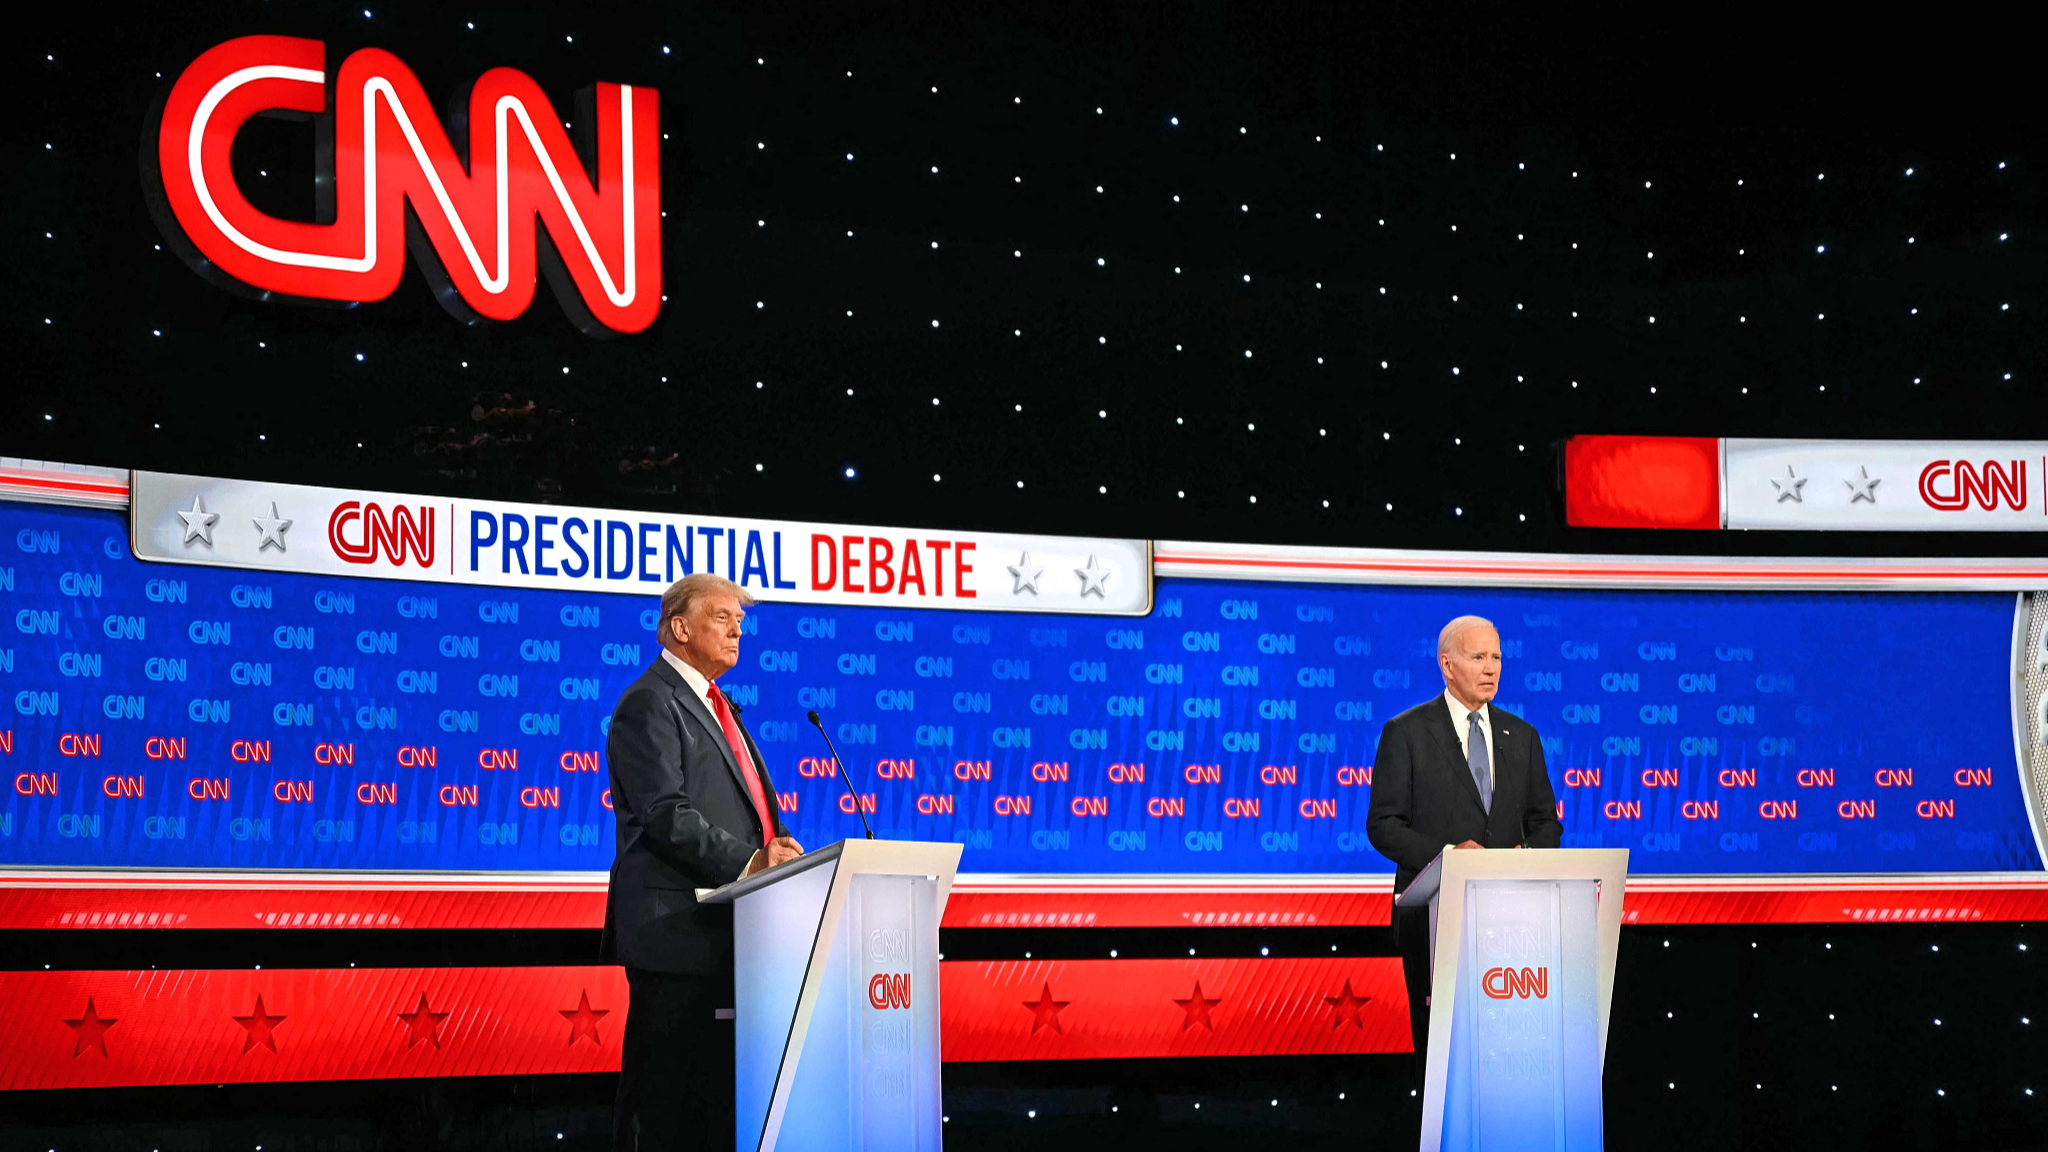 U.S. President Joe Biden and former U.S. President and Republican presidential candidate Donald Trump participate in the first presidential debate of the 2024 election at CNN's studios in Atlanta, Georgia, on June 27, 2024. /CFP